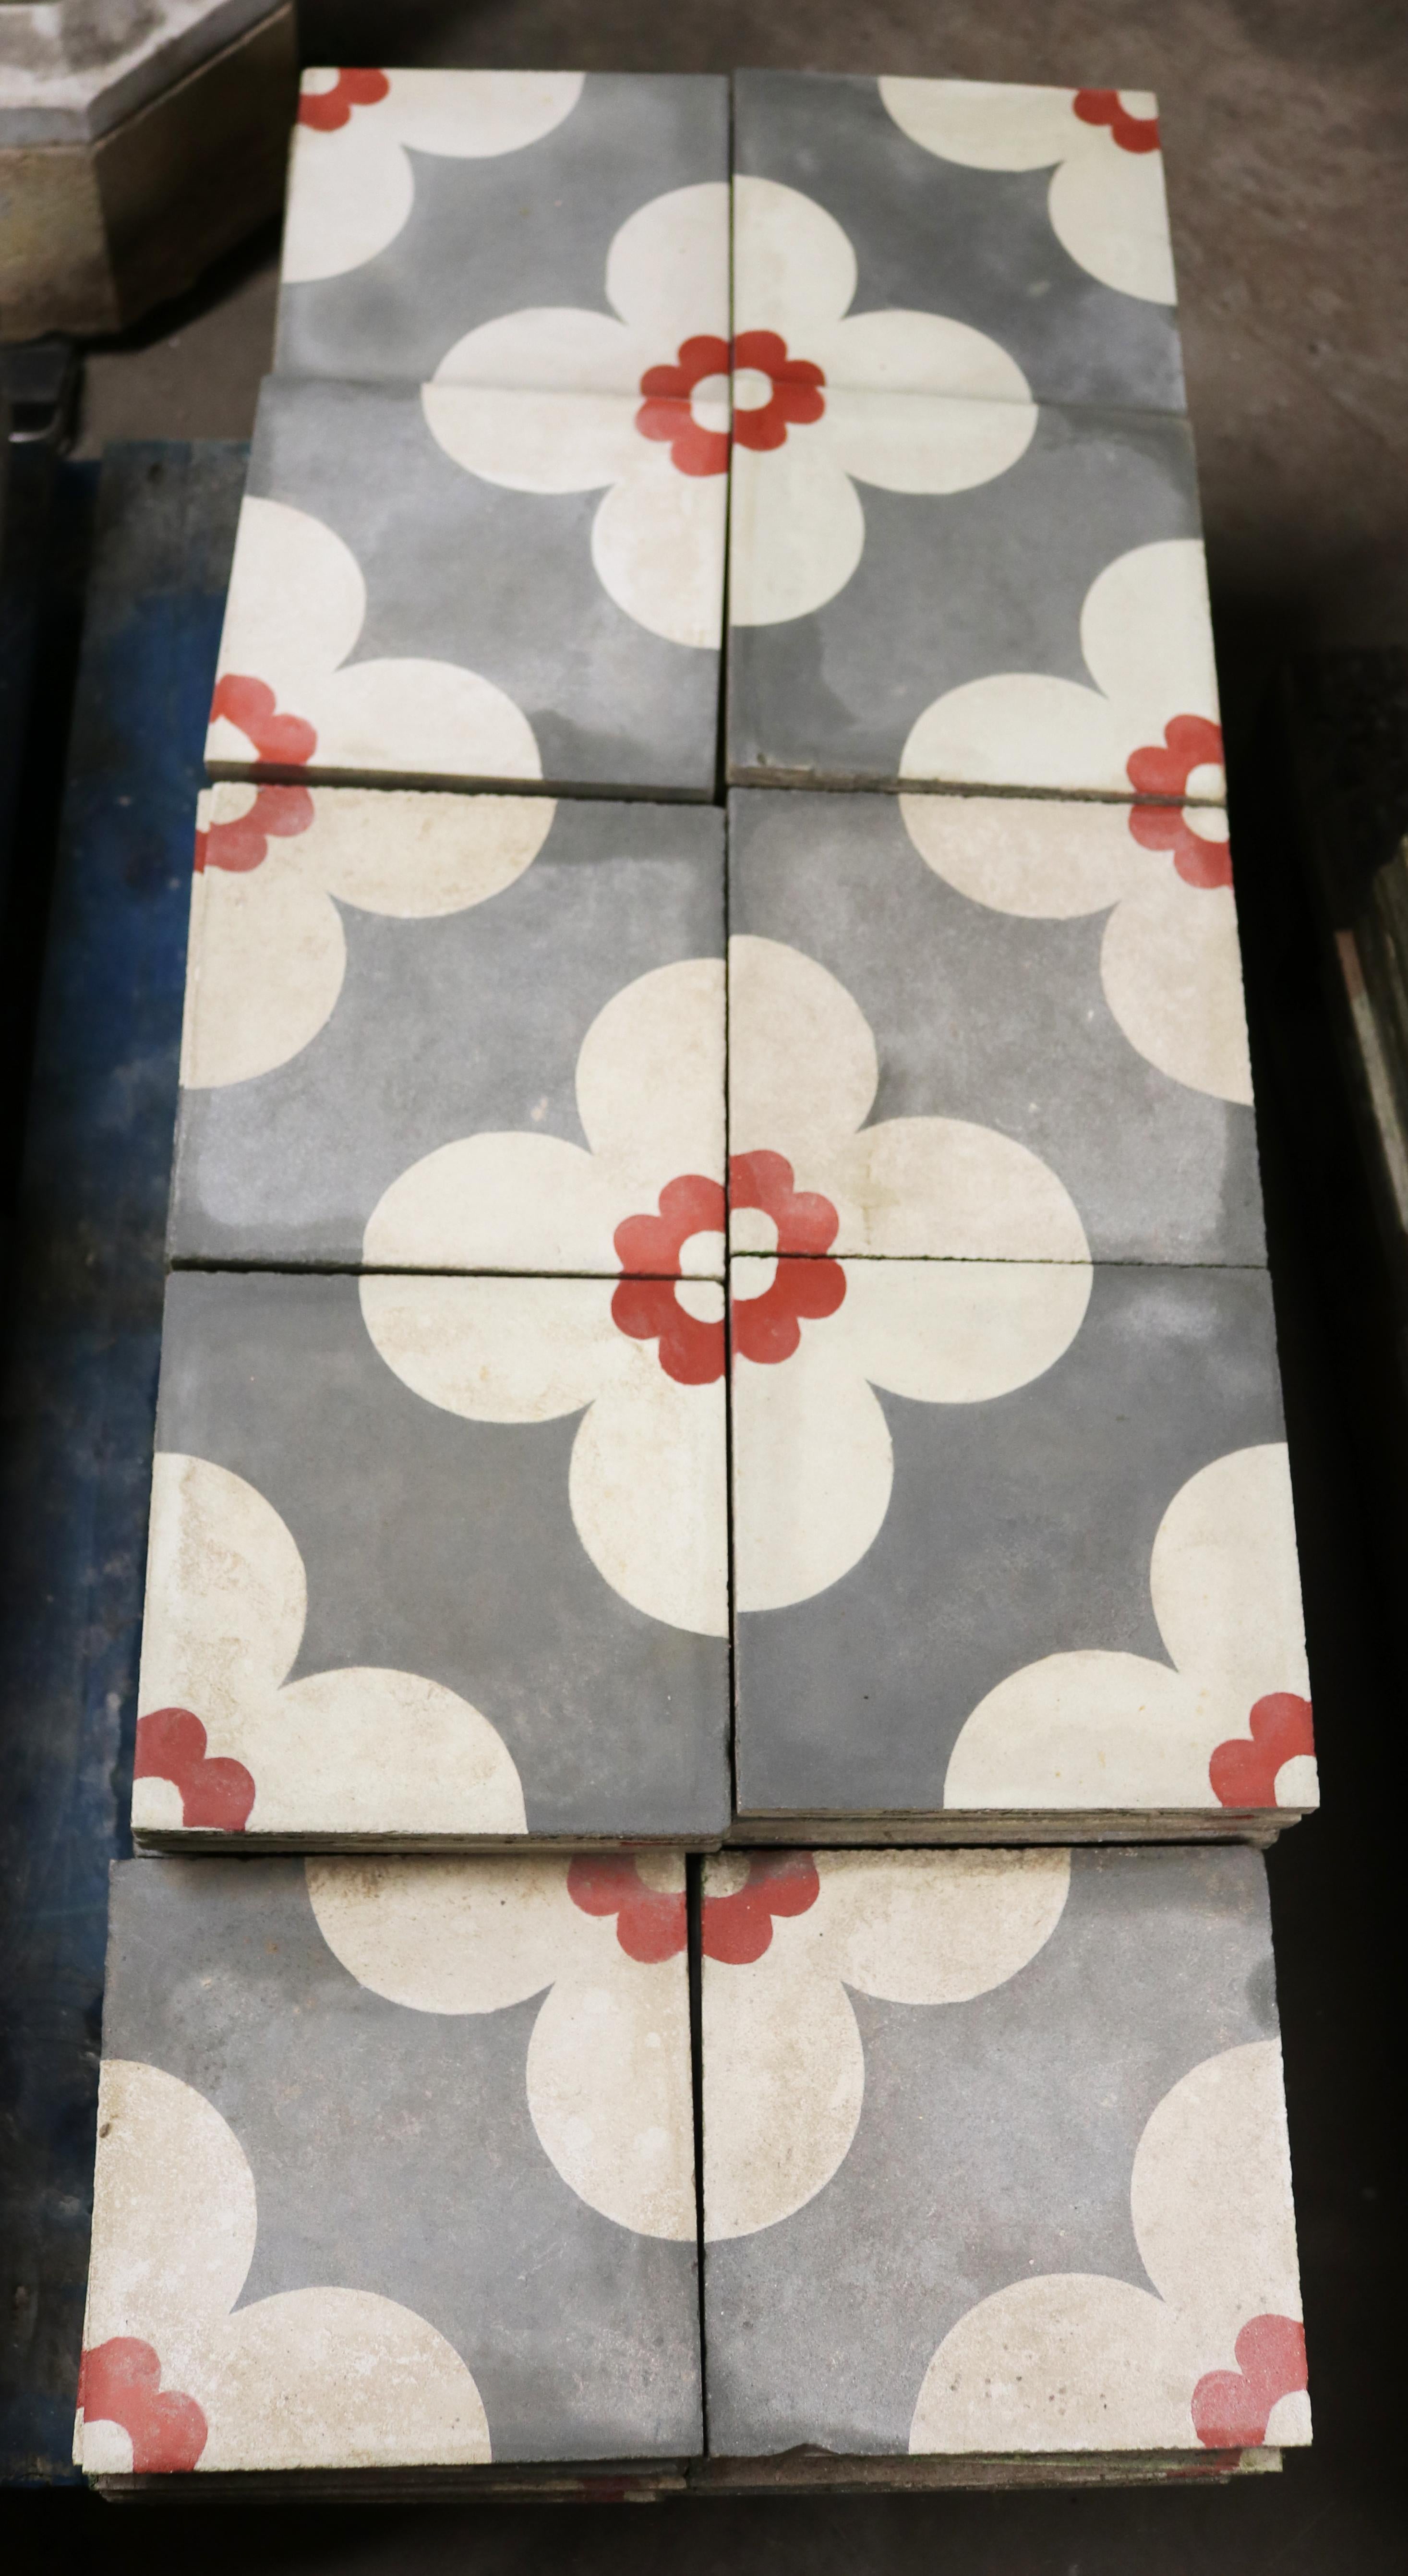 Reclaimed Patterned Encaustic Floor Tiles In Good Condition For Sale In Wormelow, Herefordshire